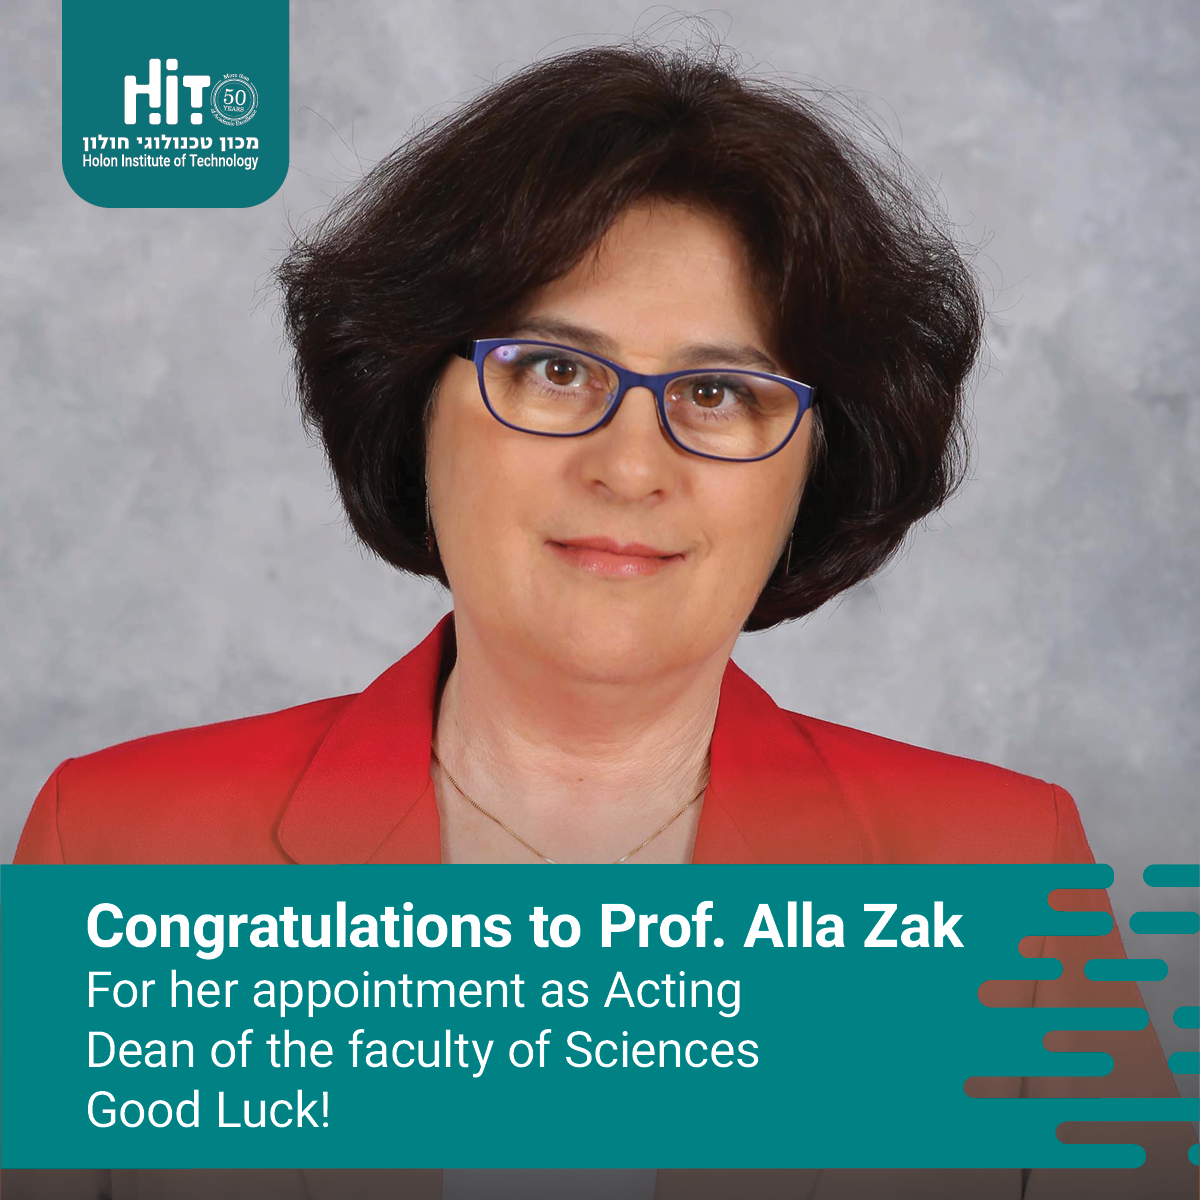 Prof. Zak was appointed Acting Dean of the Faculty of Sciences